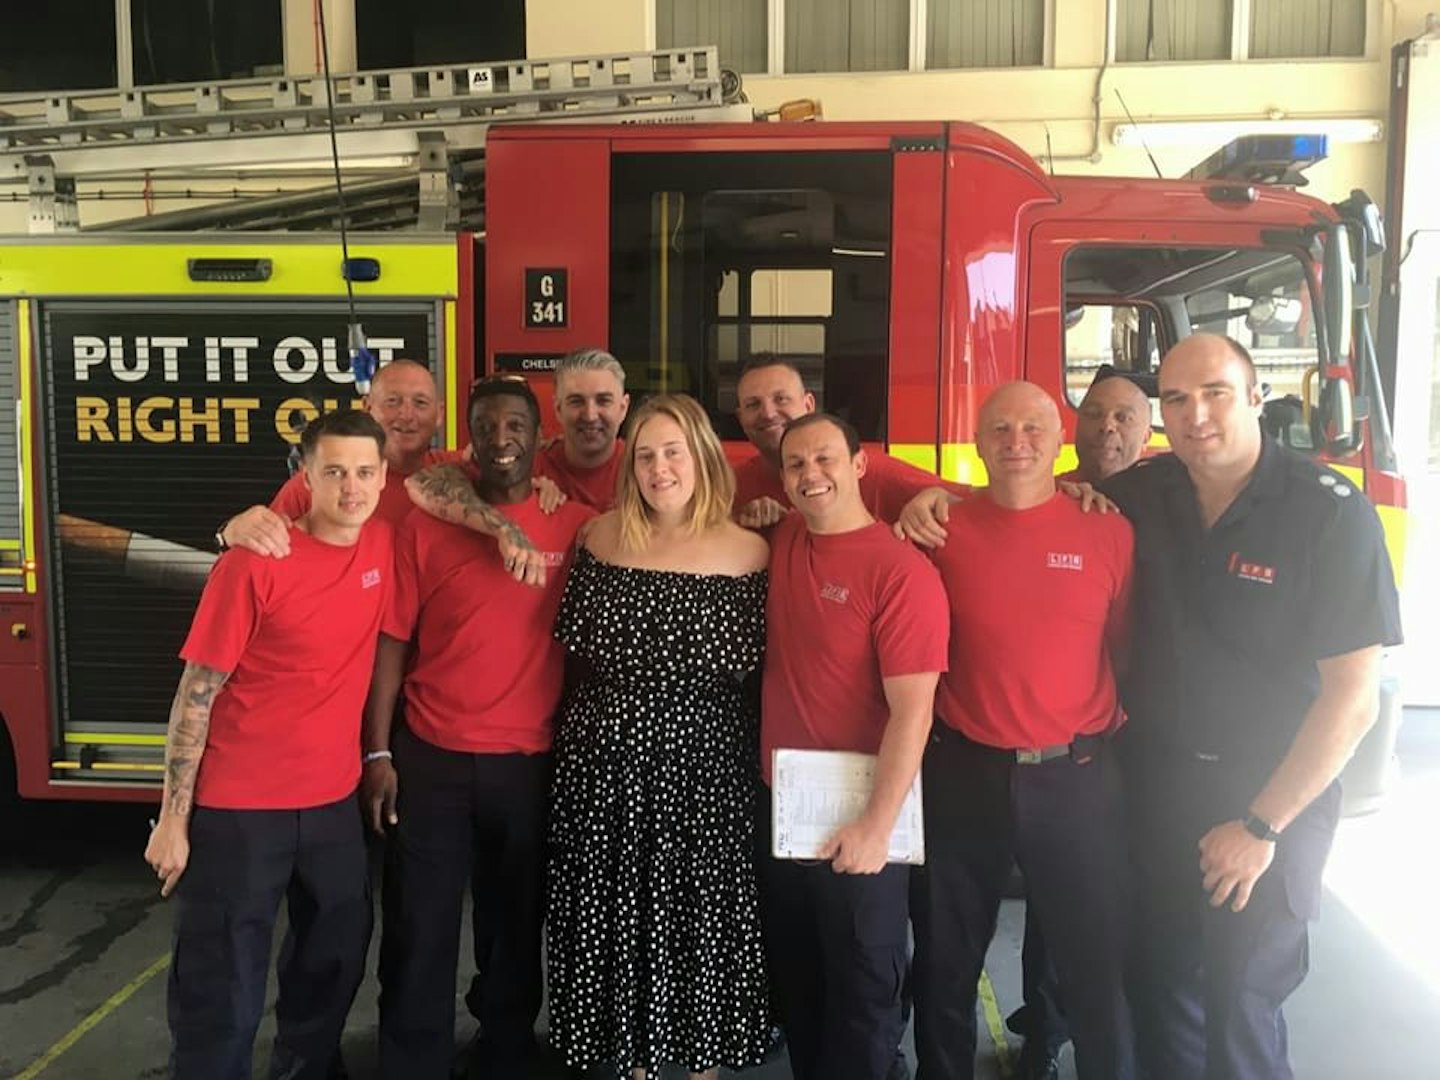 adele-visited-grenfell-tower-firefighters